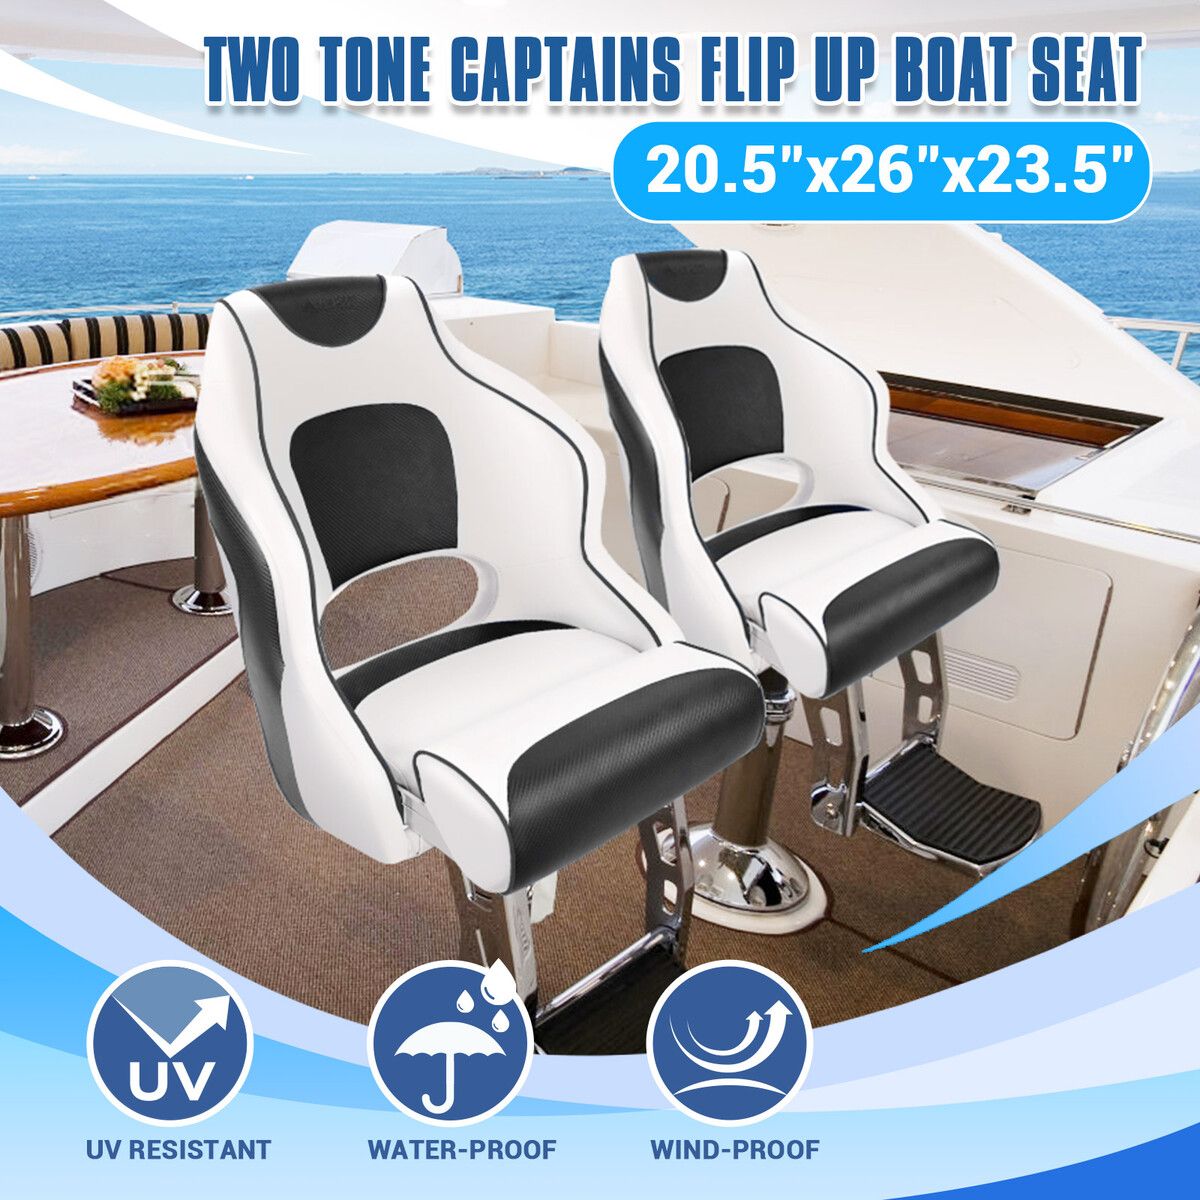 Buy OGL Captains Bucket Boat Seat Chair Helm Sports Flip Up Bolster Grey  and White MyDeal